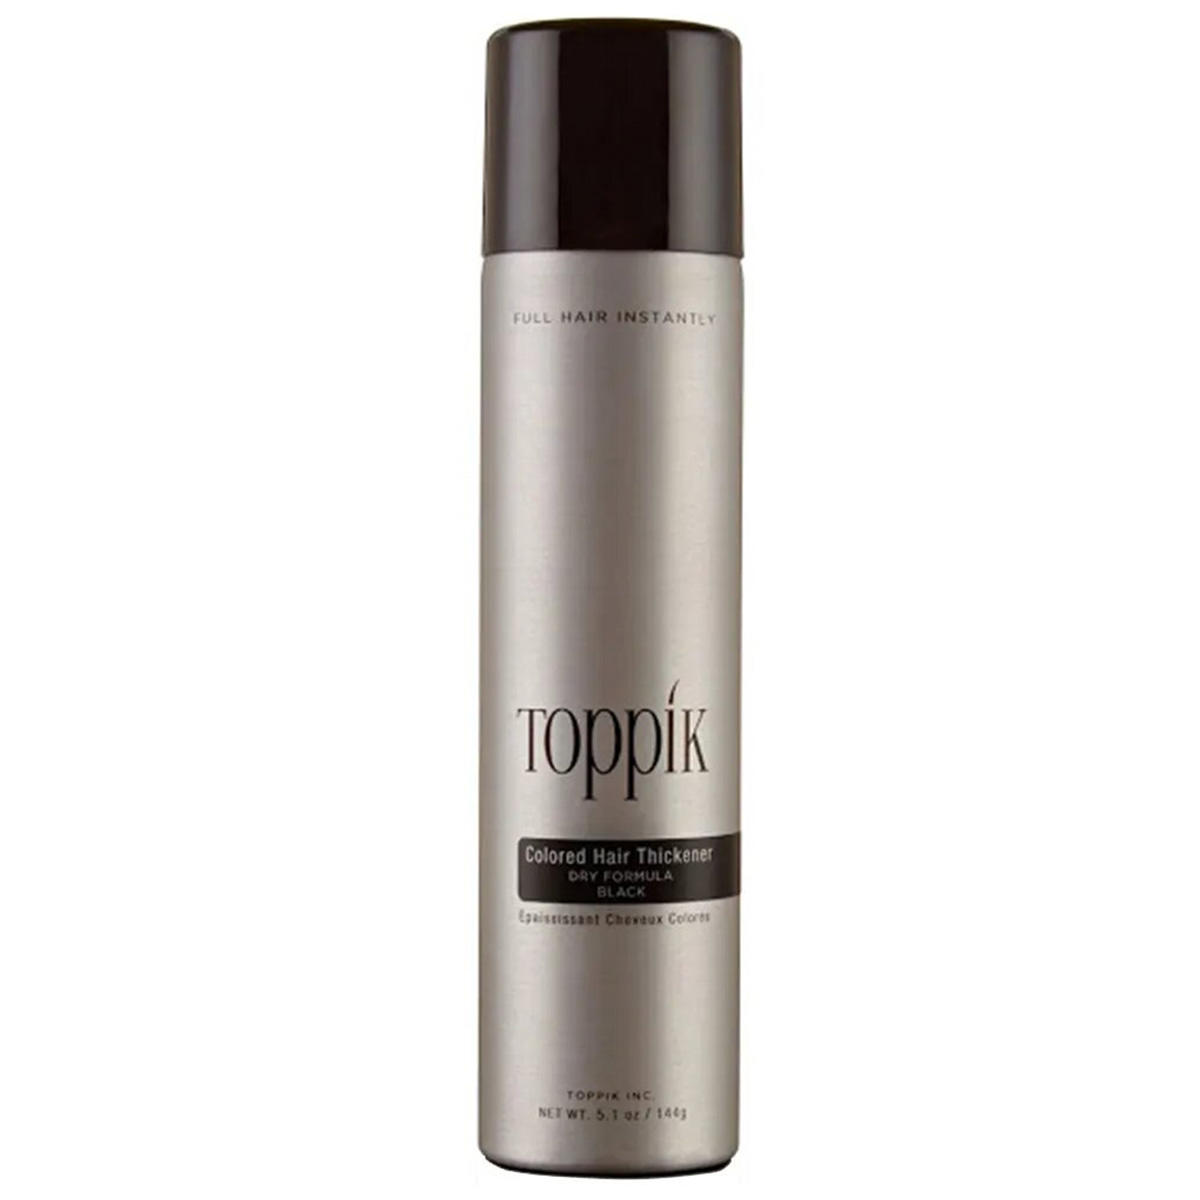 TOPPIK Colored Hair Thickener  - 1